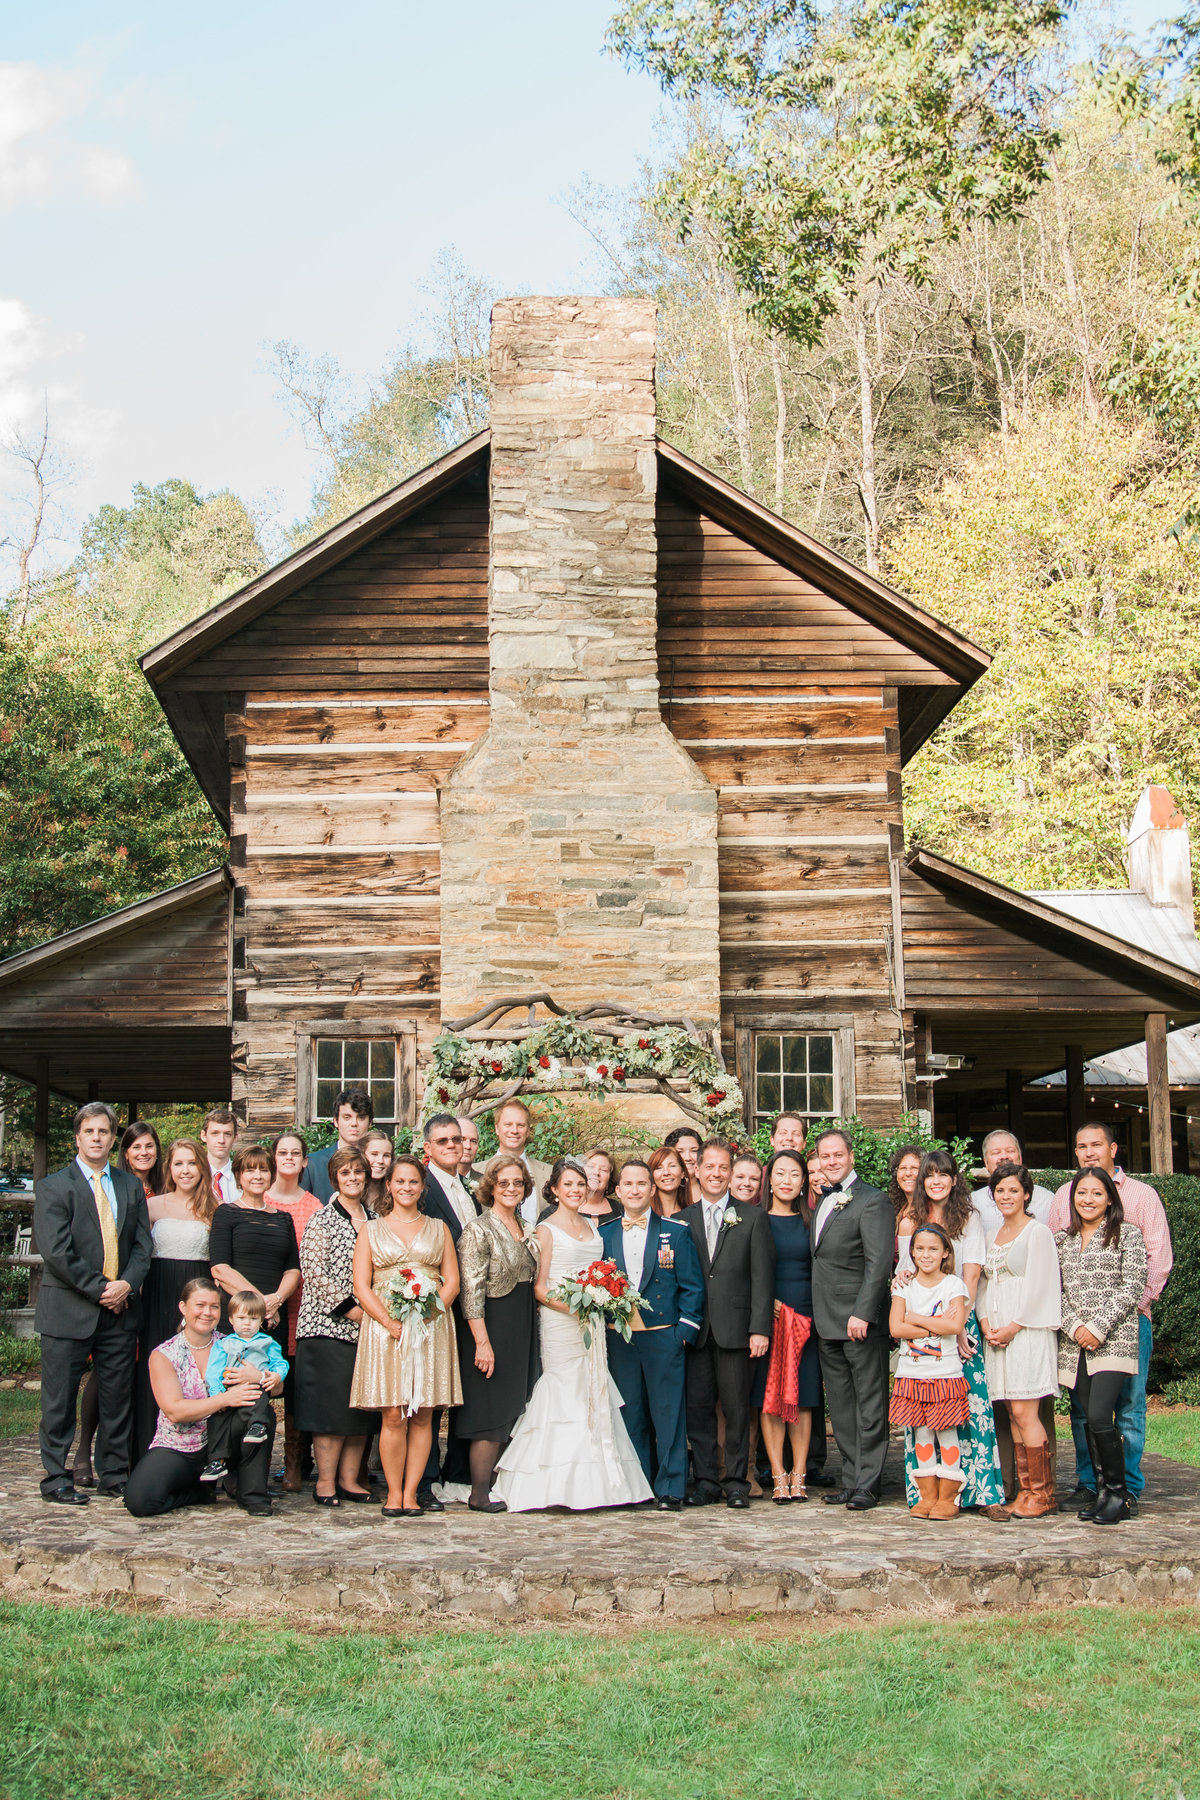 Rustic outdoor wedding photographed at Leatherwood Mountain by Boone Photographer Wayfaring Wanderer. Leatherwood is a gorgeous venue in Ferguson, NC.